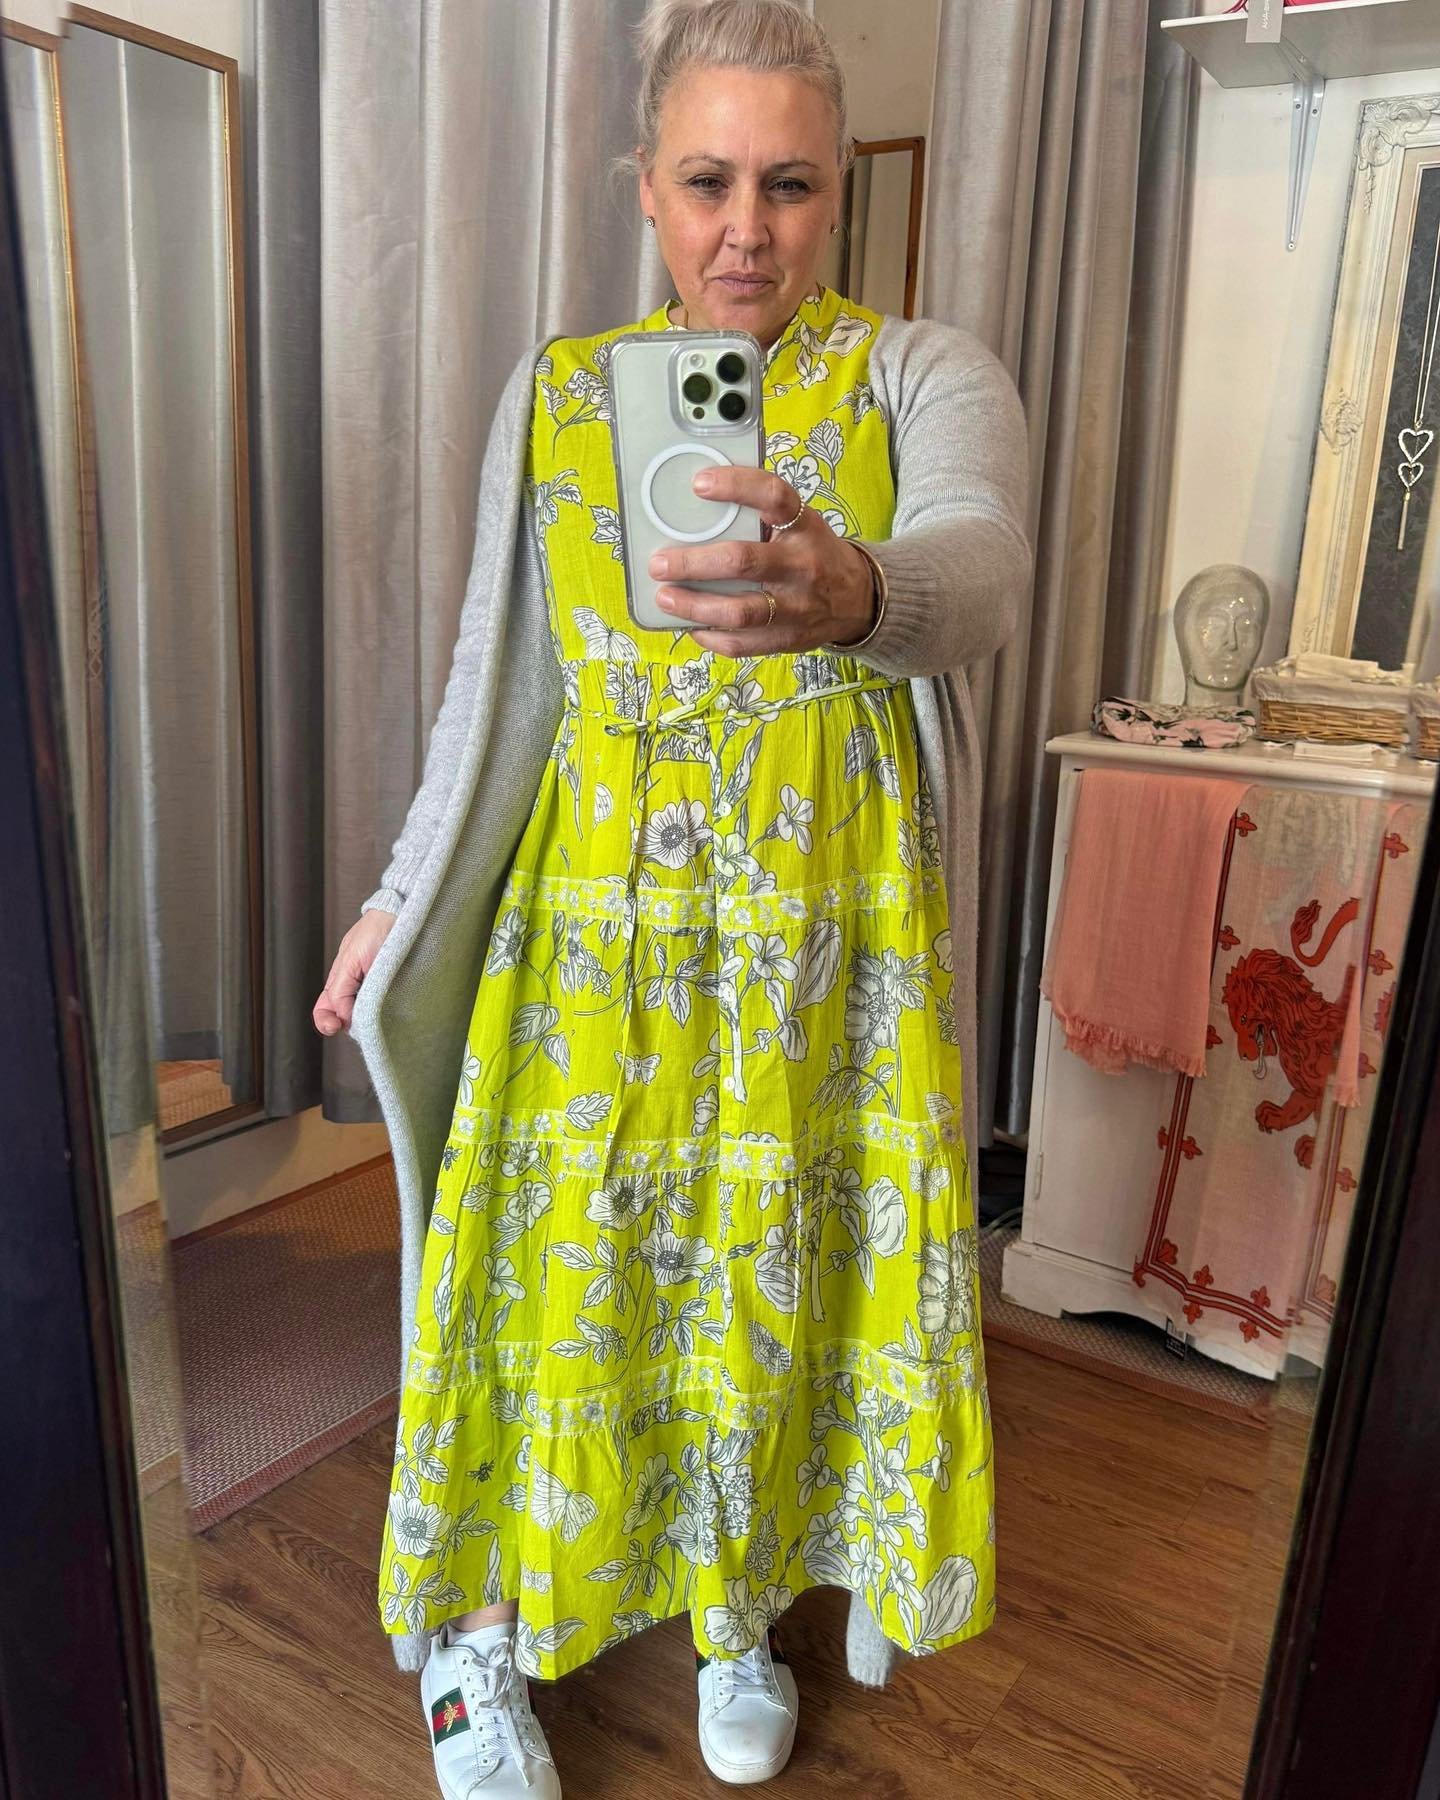 NEW IN! Indian cotton, tiered maxi dress with sleeves and tie waist. Wonderful and fun floral print, in bright yellow and pink! 💛💖 In store now x

#newin #clothinghaul #womensclothing #womensfashion #womensstyle #stylish #everydaywear #highstreetfa